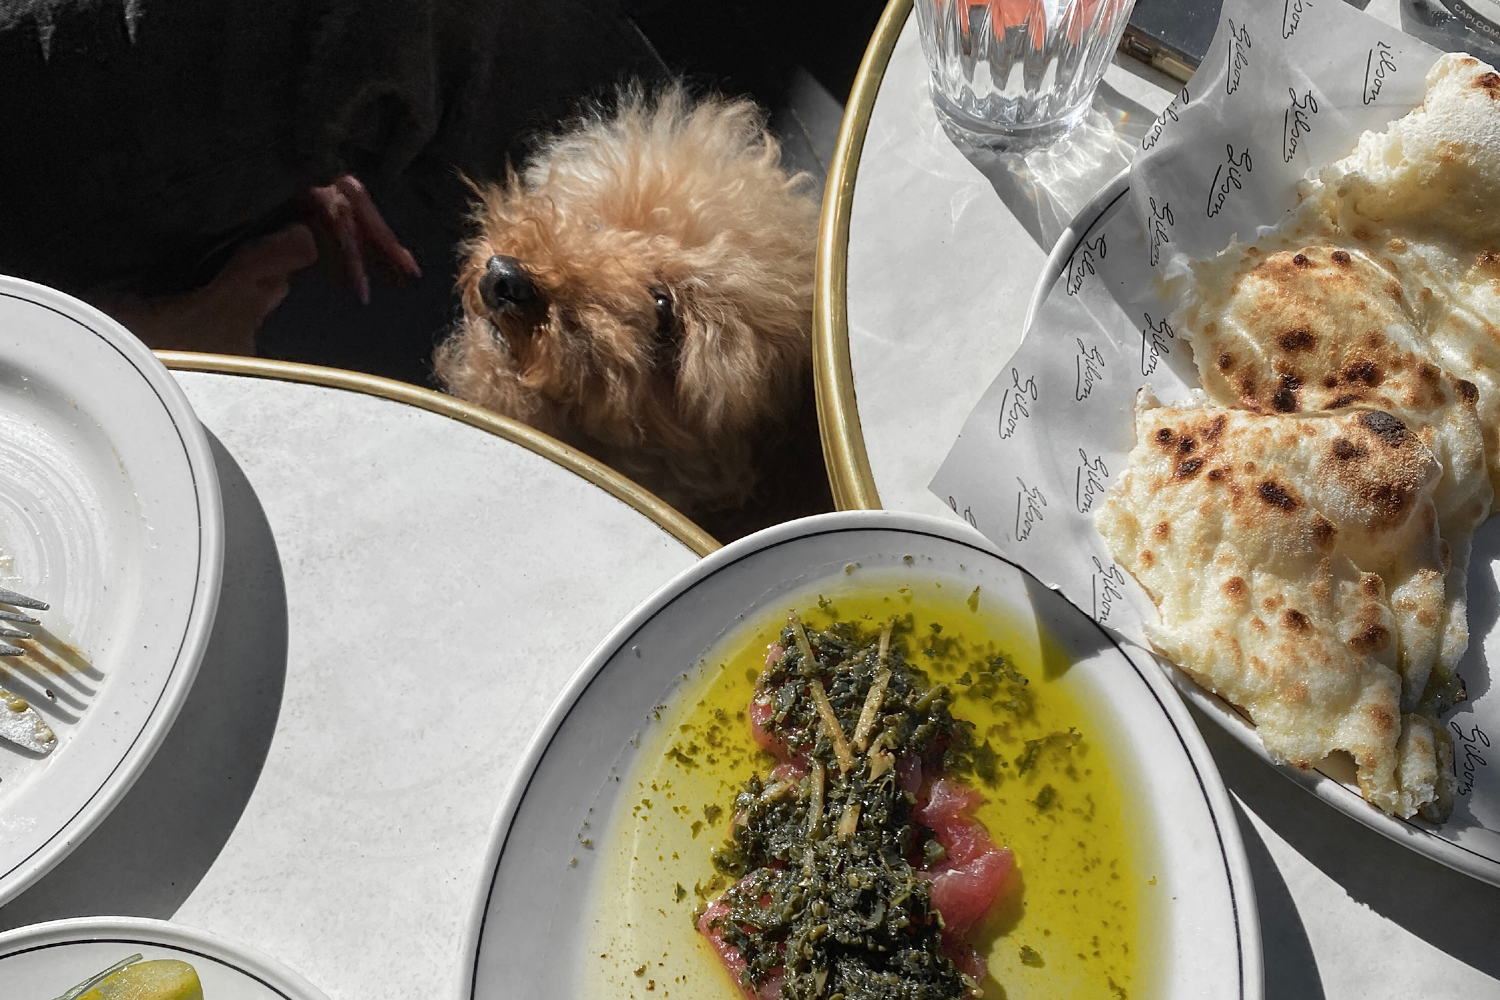 Melbourne's Dog Friendly Dining